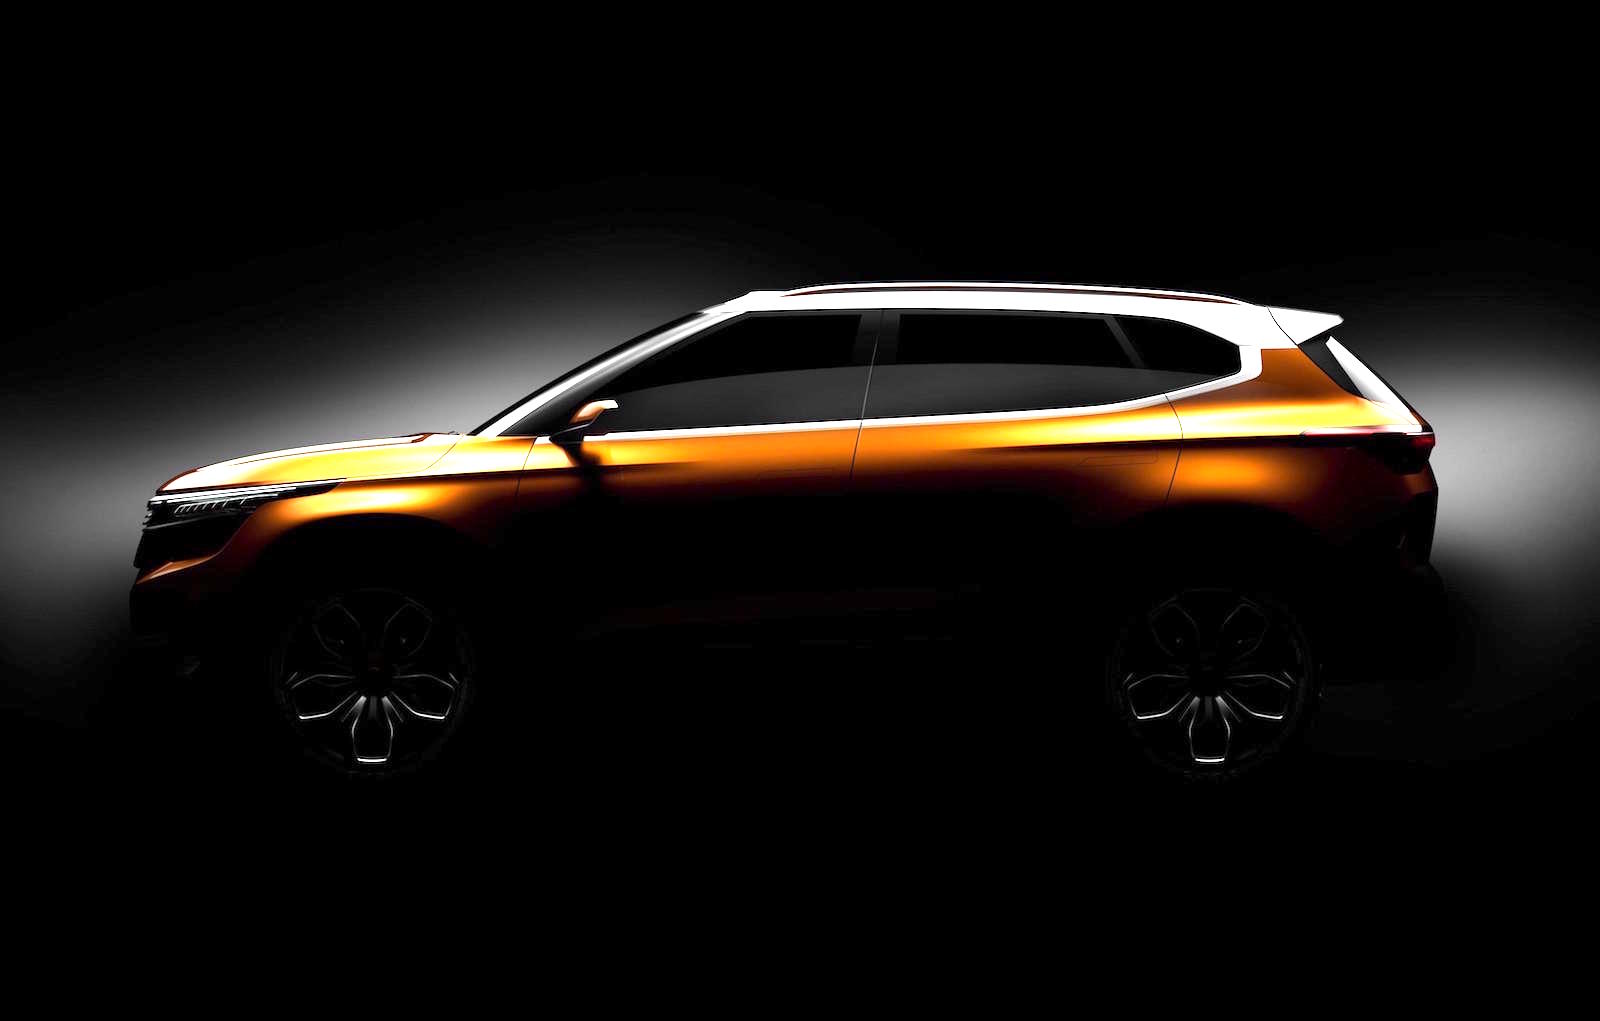 Kia SP Concept previews new compact SUV for India